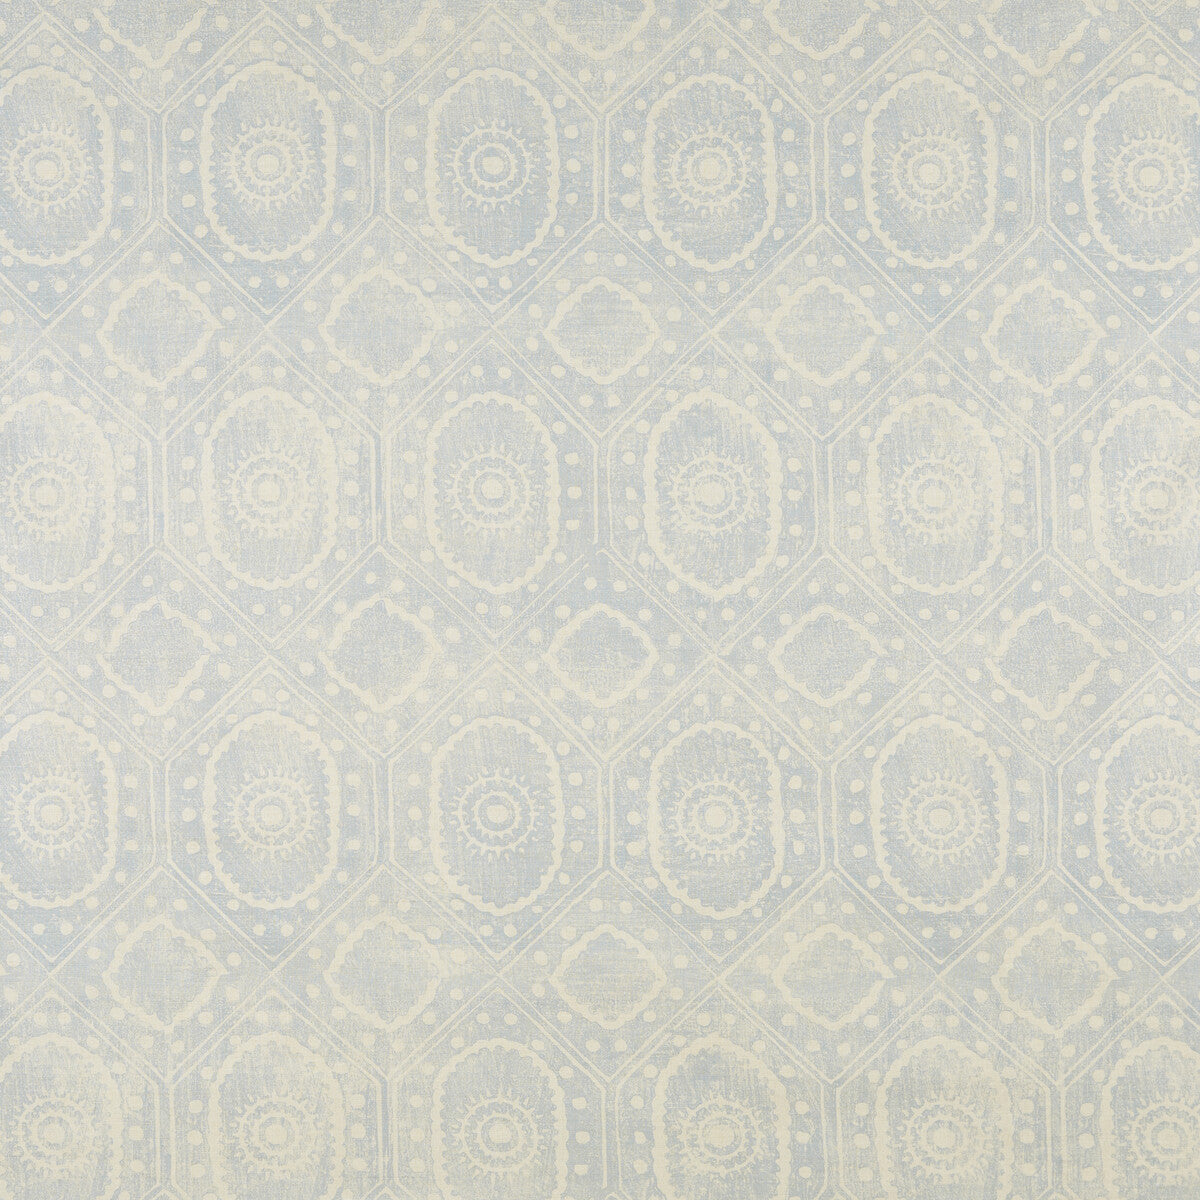 Diamond fabric in pale blue color - pattern BFC-3643.5.0 - by Lee Jofa in the Blithfield collection